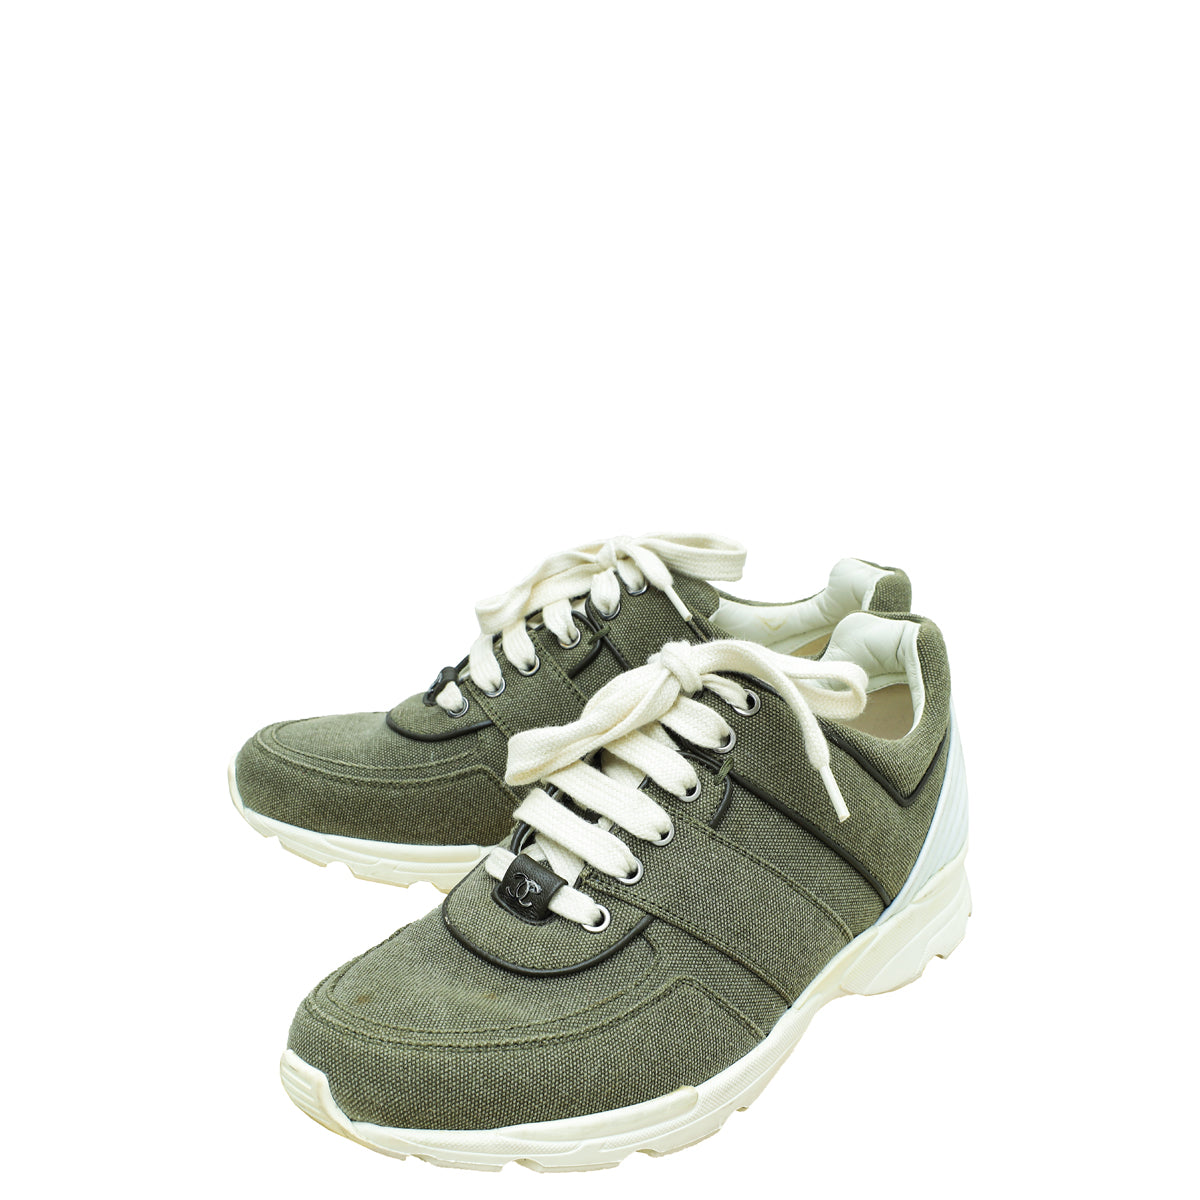 Chanel Light Military Green CC Lace Up Sneakers 38.5 – The Closet